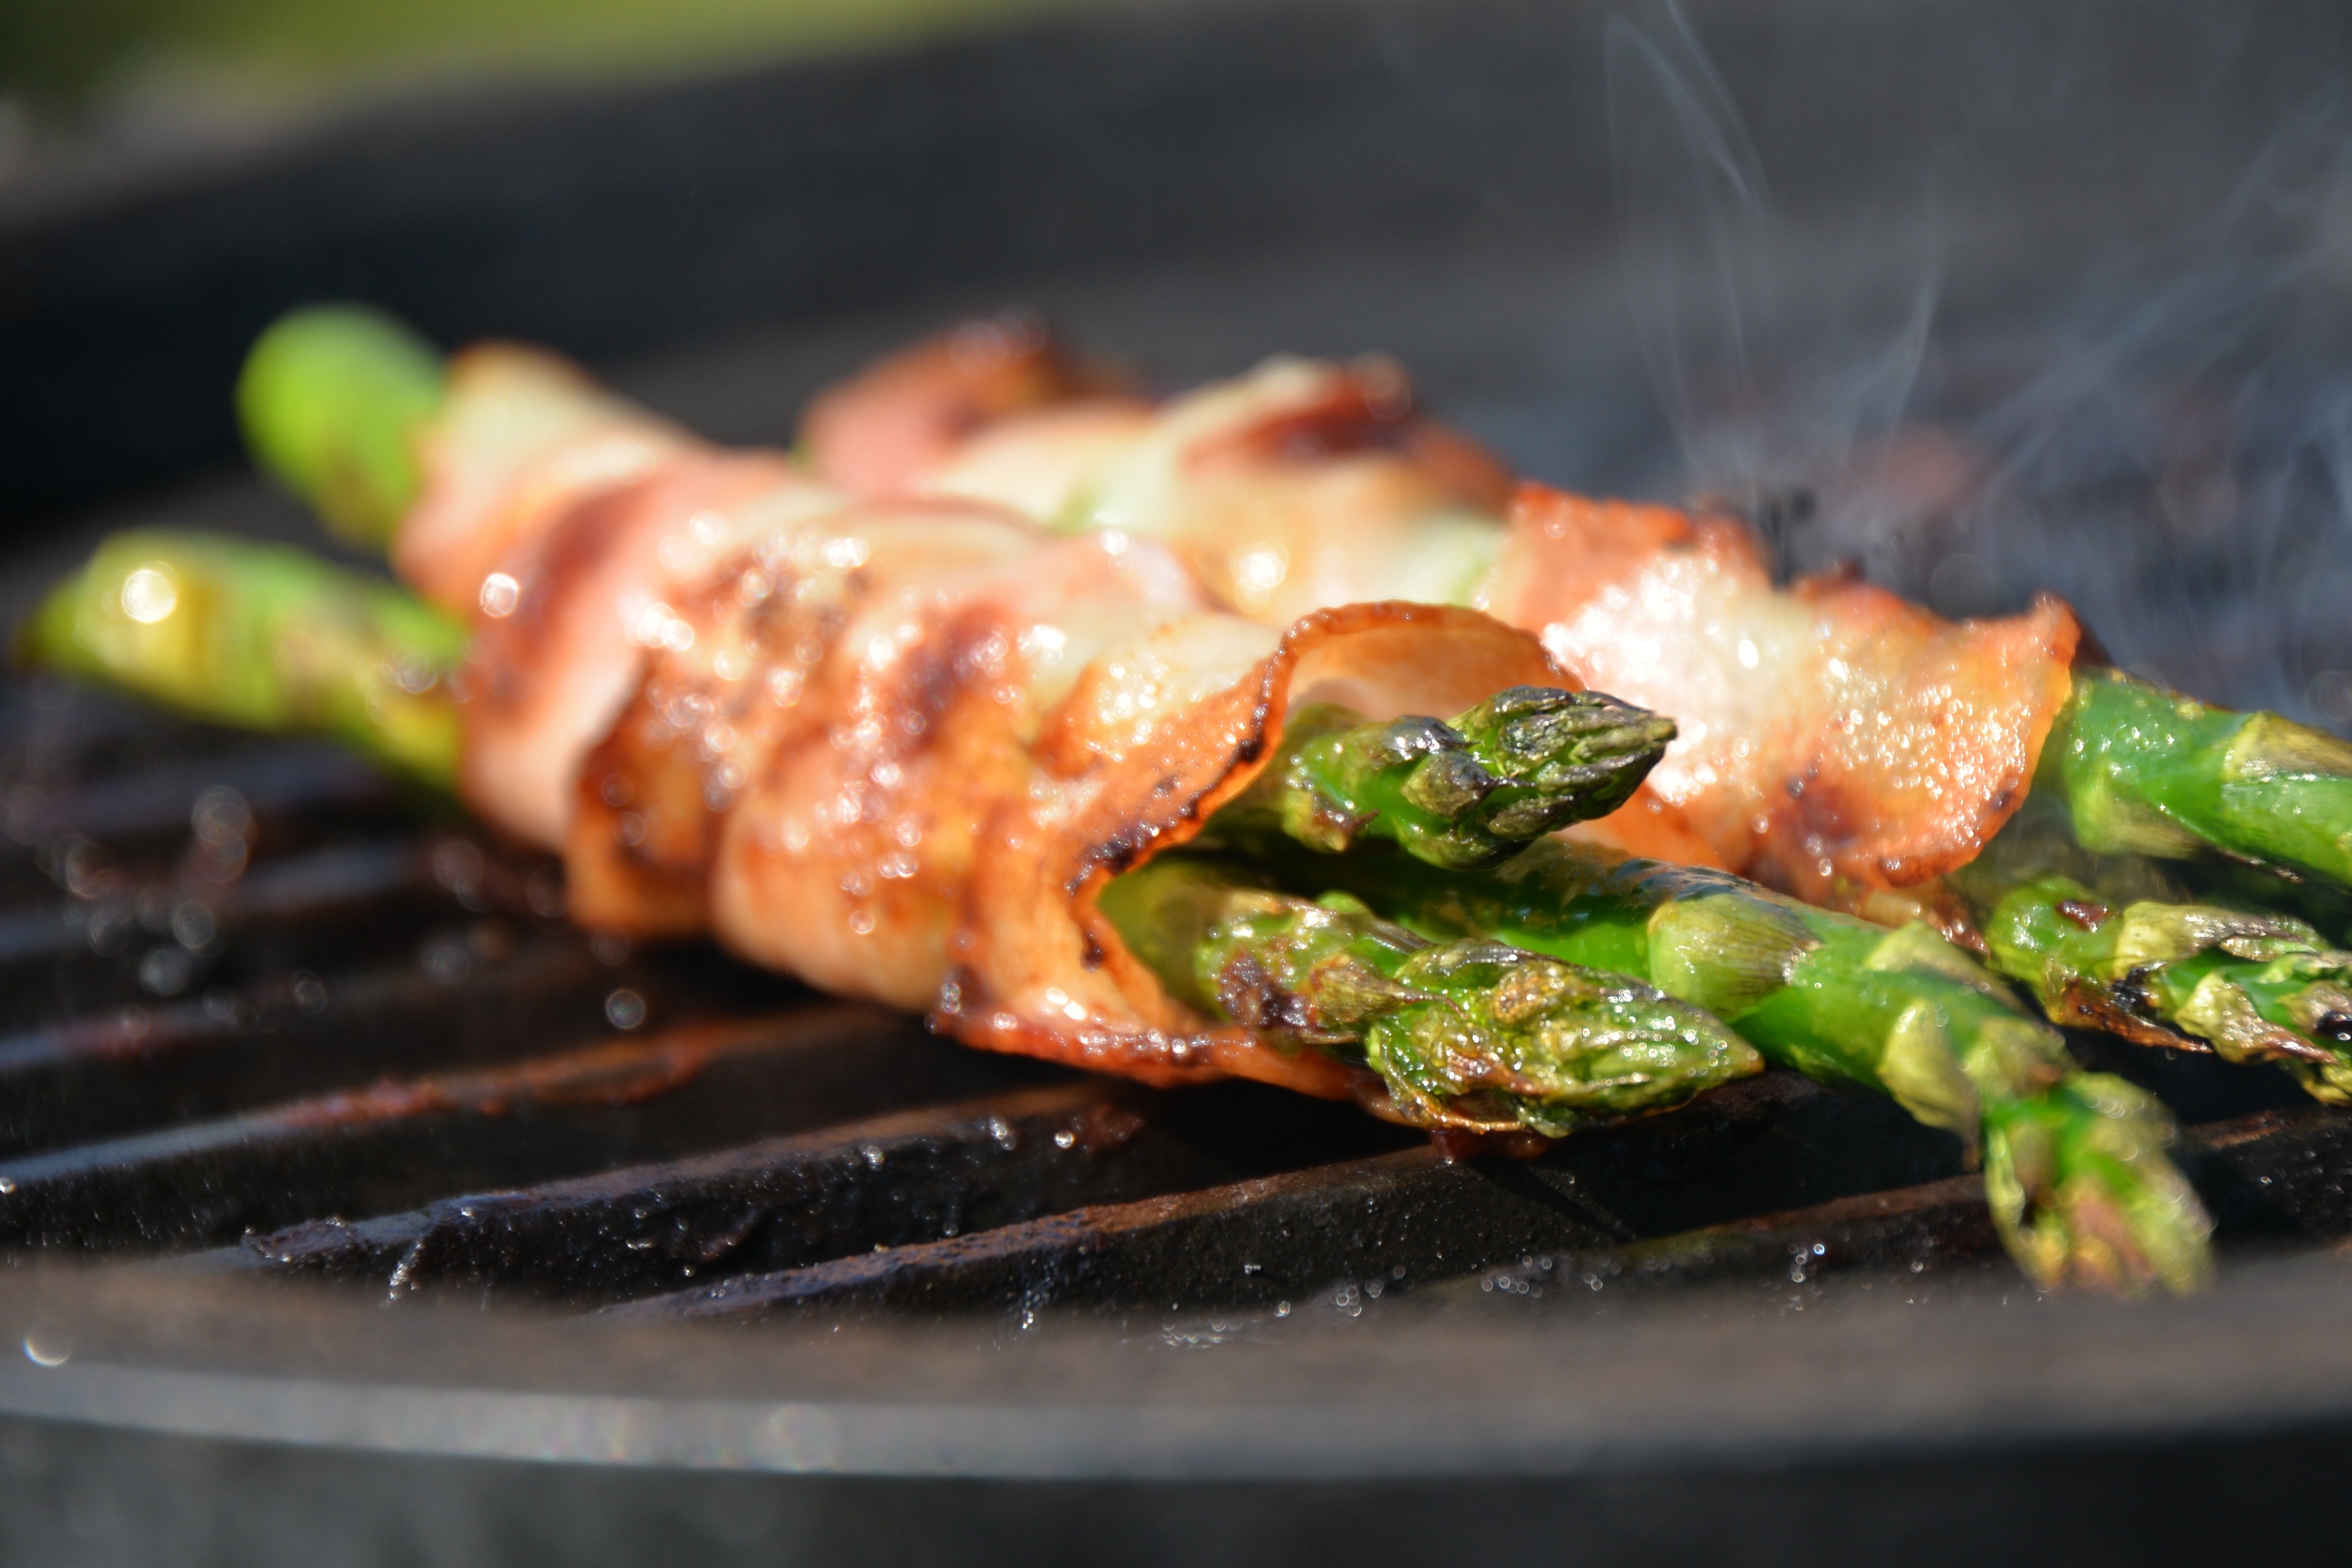 Grill, Asparagus, Lunch, Vegetables, grilled, barbecue